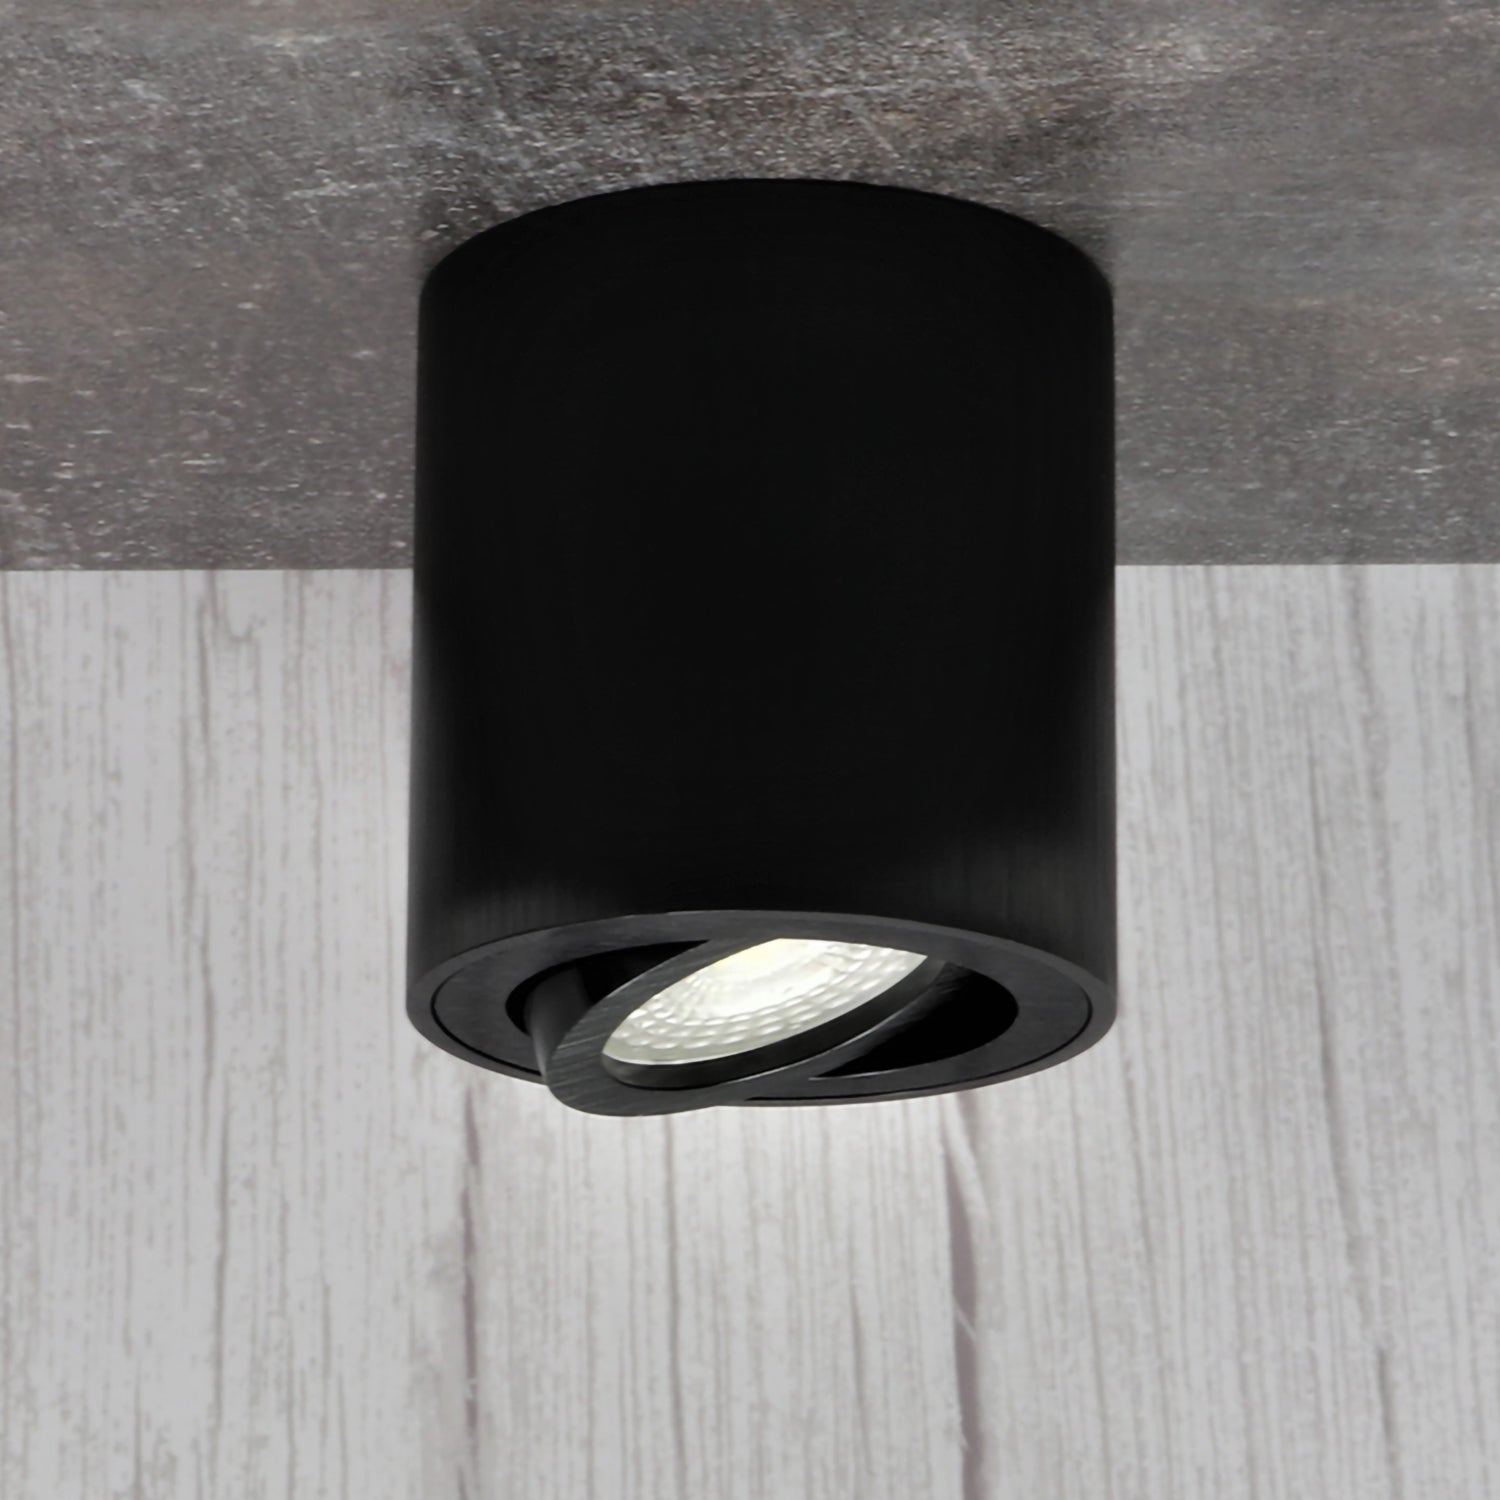 LED surface-mounted spotlight 6.2W light – light novoom 230V Dimmable GU10 ceiling Milano Surface-mounted Black Round